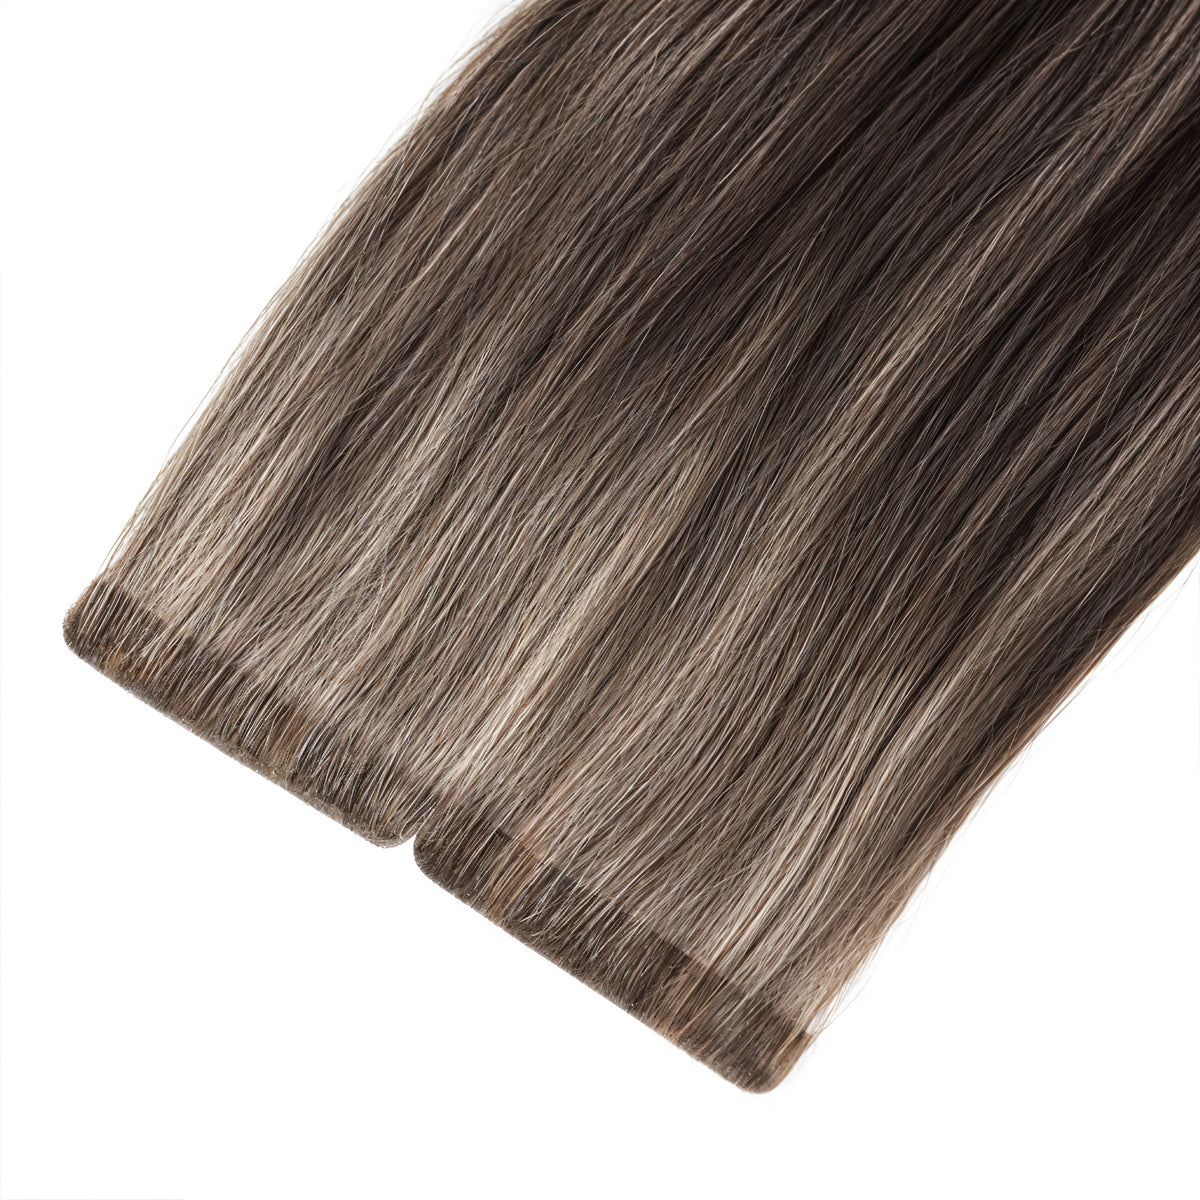 Skin Weft Hair Extensions are perfect for adding length and volume, providing a natural-looking finish. These high-quality extensions blend seamlessly with your natural hair.